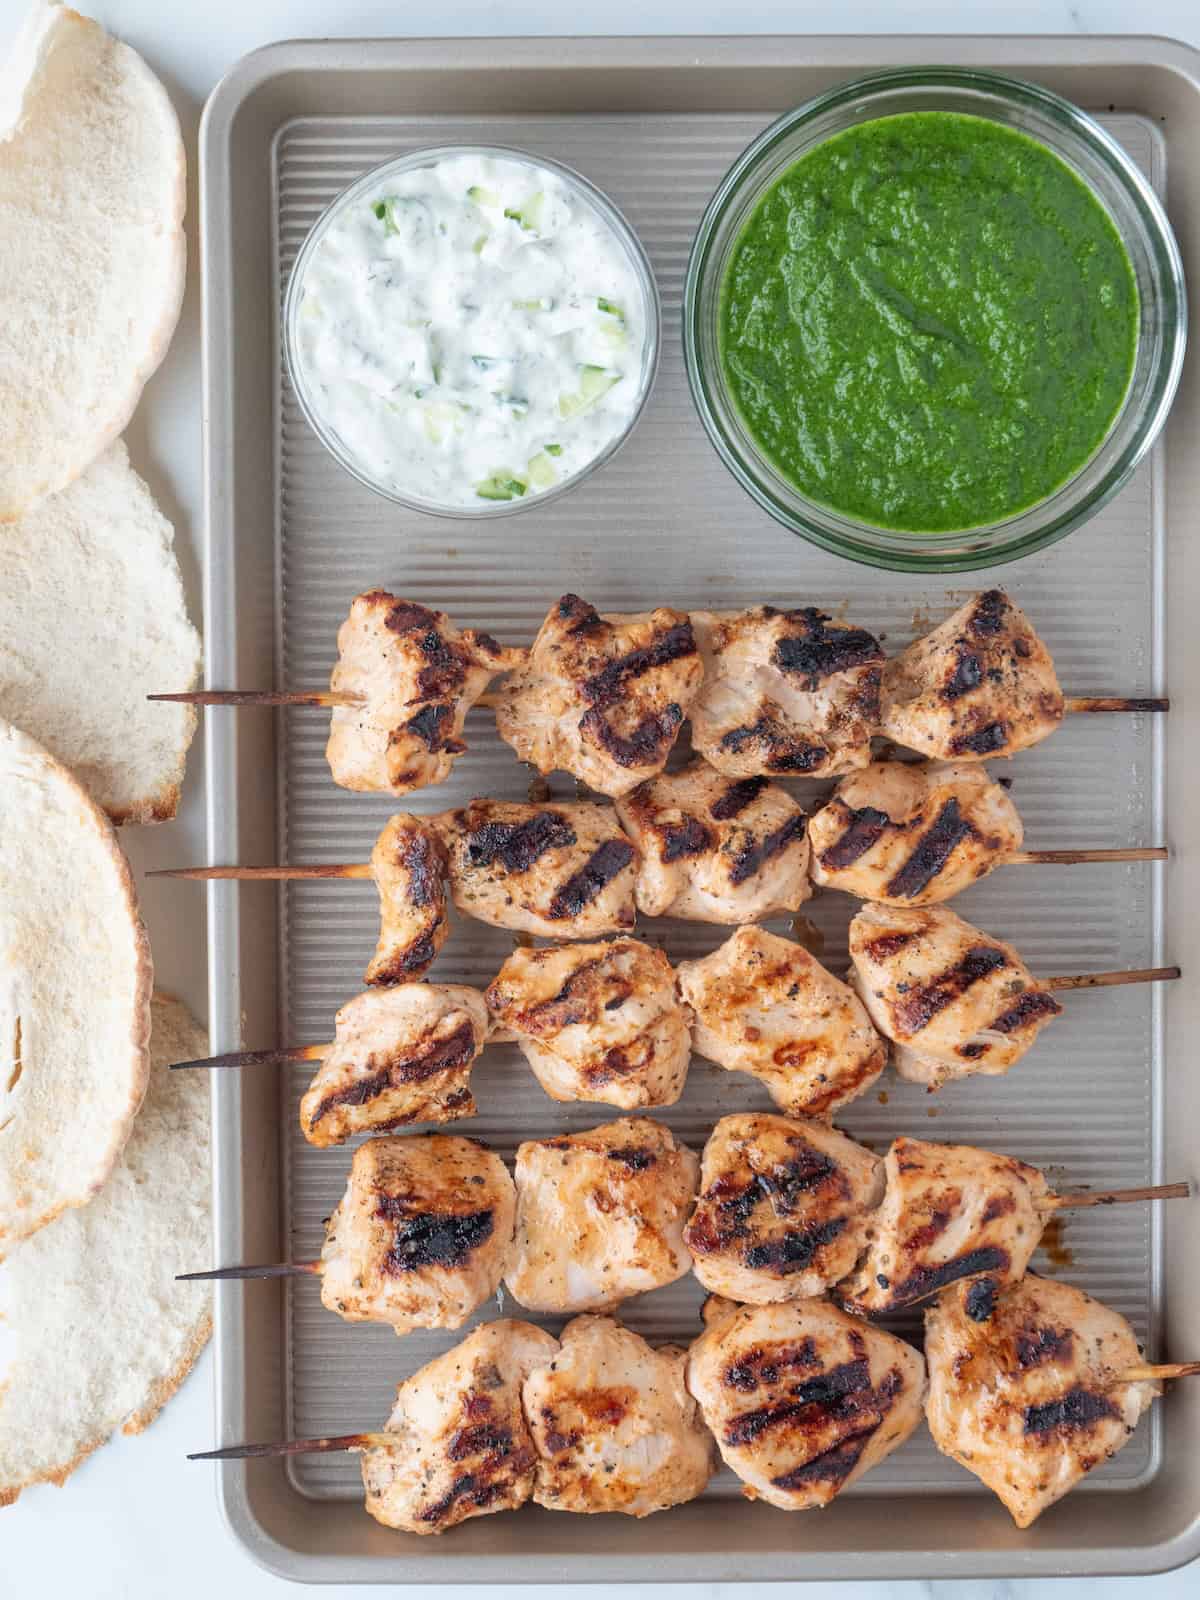 A baking sheet with chicken skewers, a bowl of tzatziki, a bowl of cilantro mint sauce and some pitas on the side.